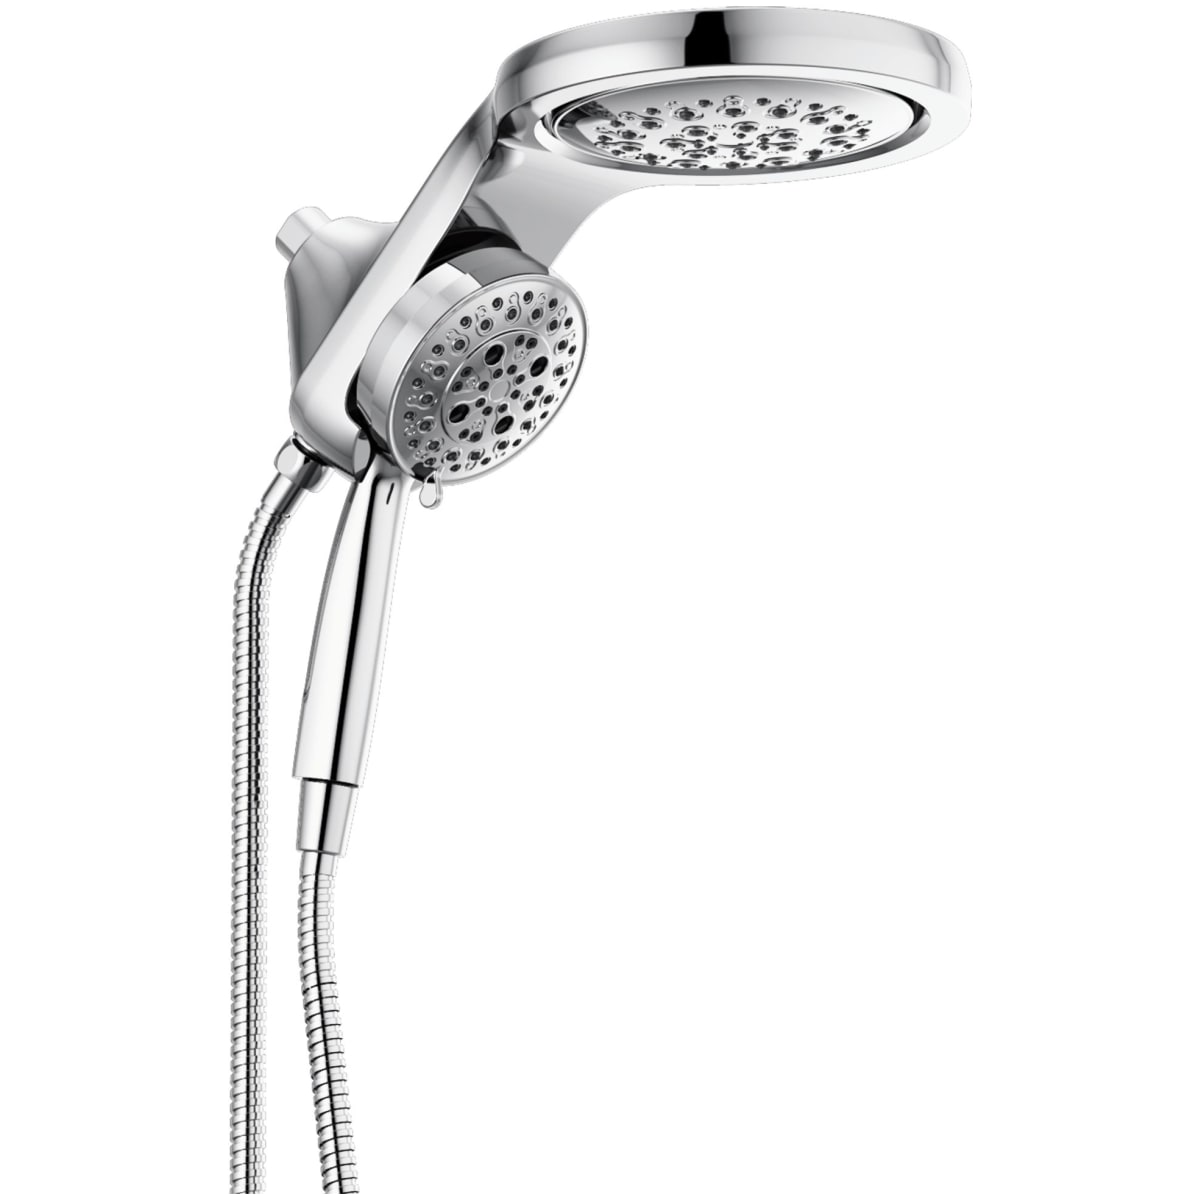 HydroRain 5-Function 2-in-1 Shower In Chrome